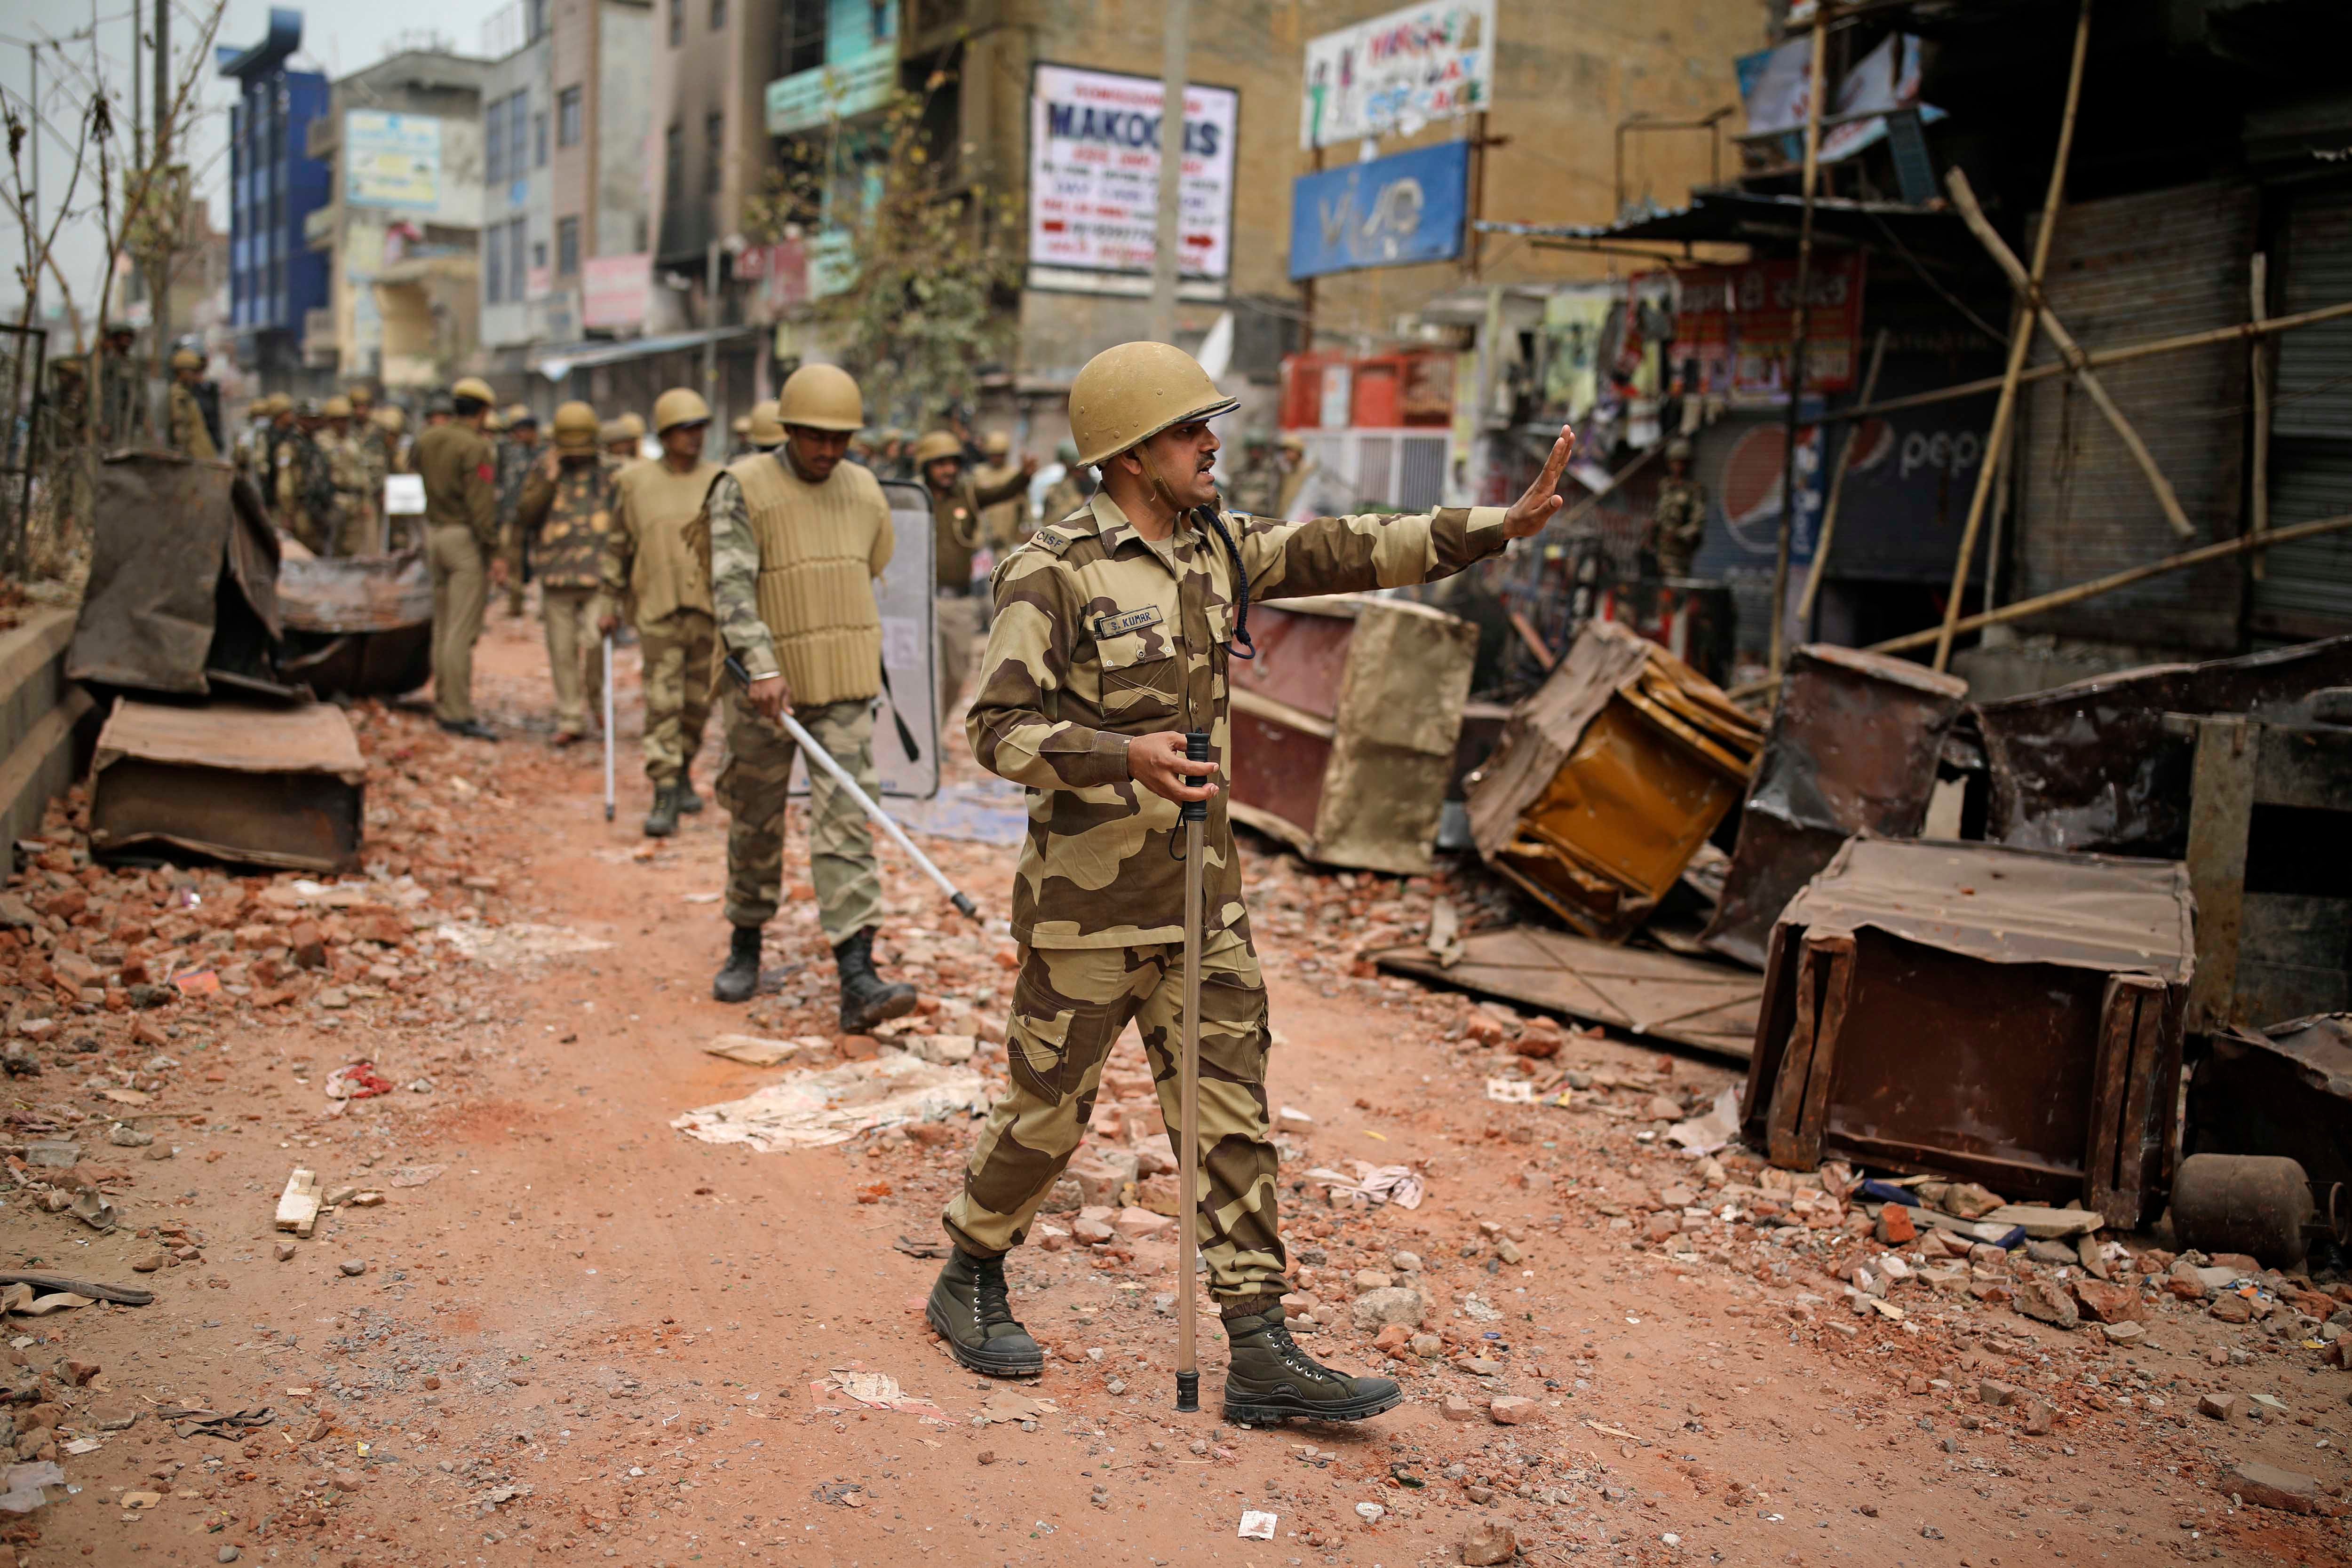 An Indian paramilitary soldier asks residents to stay indoors as they patrol a street vandalized in February 25th's violence in New Delhi, India, February 27, 2020.